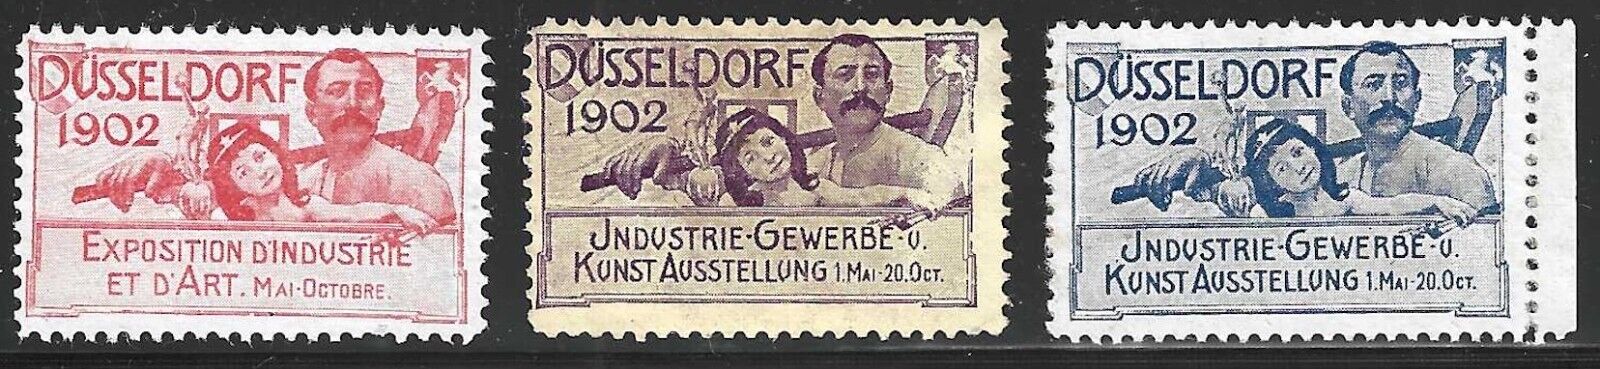 Dusseldorf, Germany, 1902 Art & industry Exhibition, Set of 3 Poster Stamps